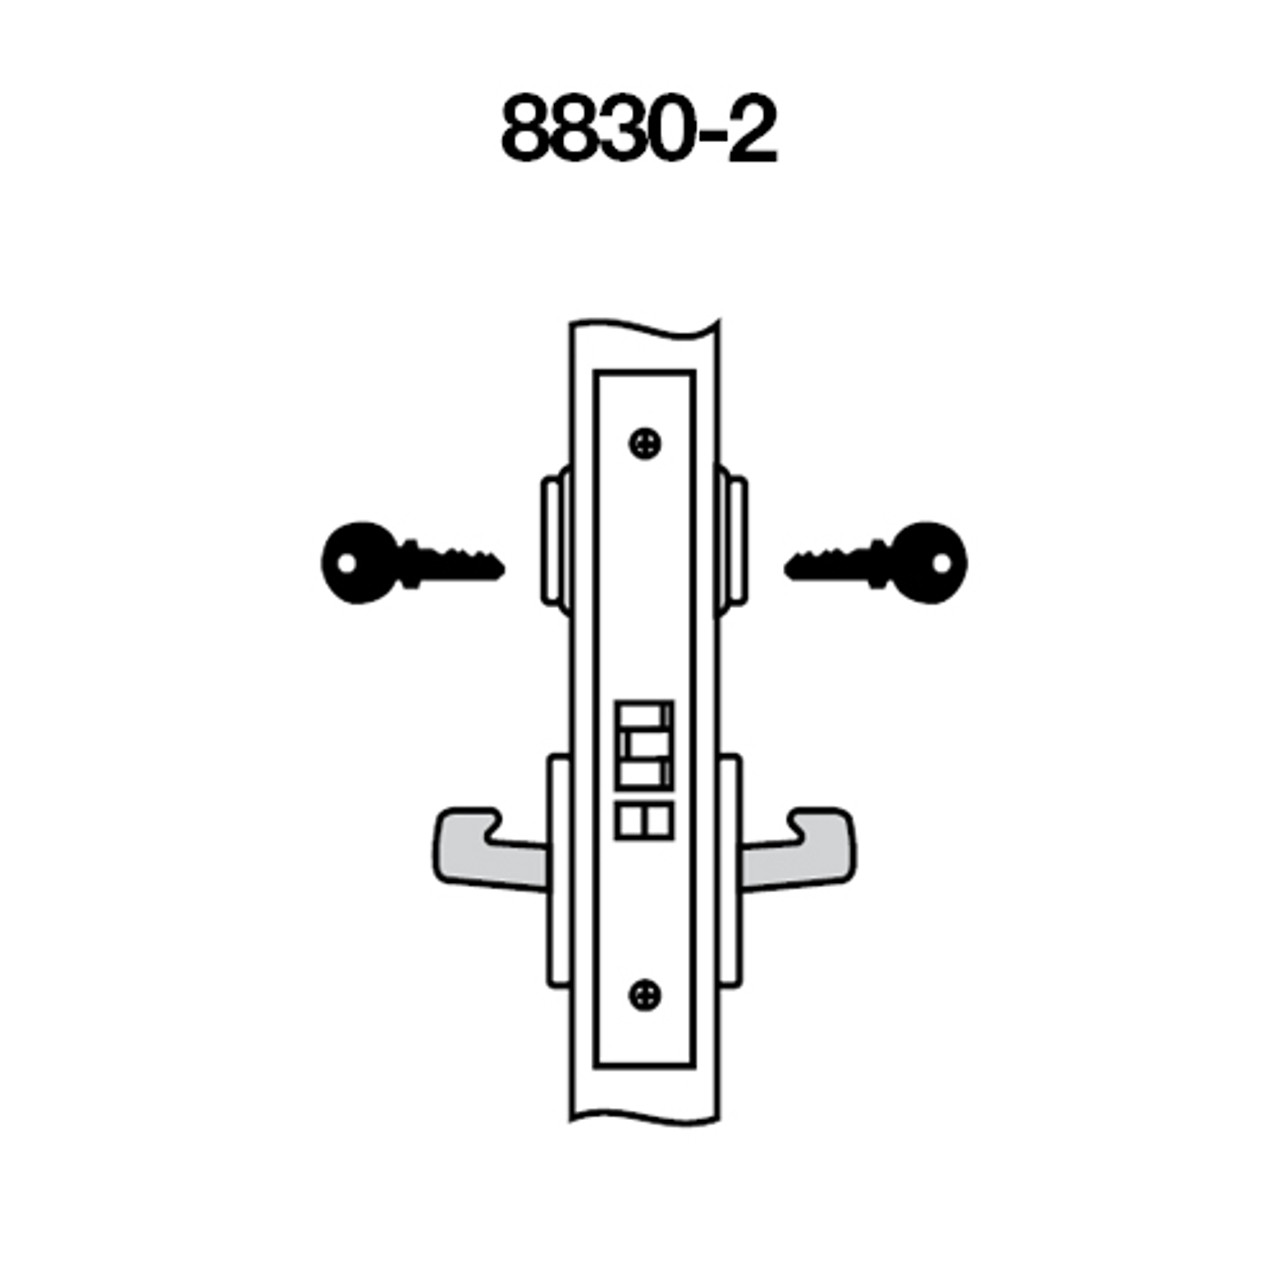 PBR8830-2FL-630 Yale 8800FL Series Double Cylinder Mortise Asylum Locks with Pacific Beach Lever in Satin Stainless Steel